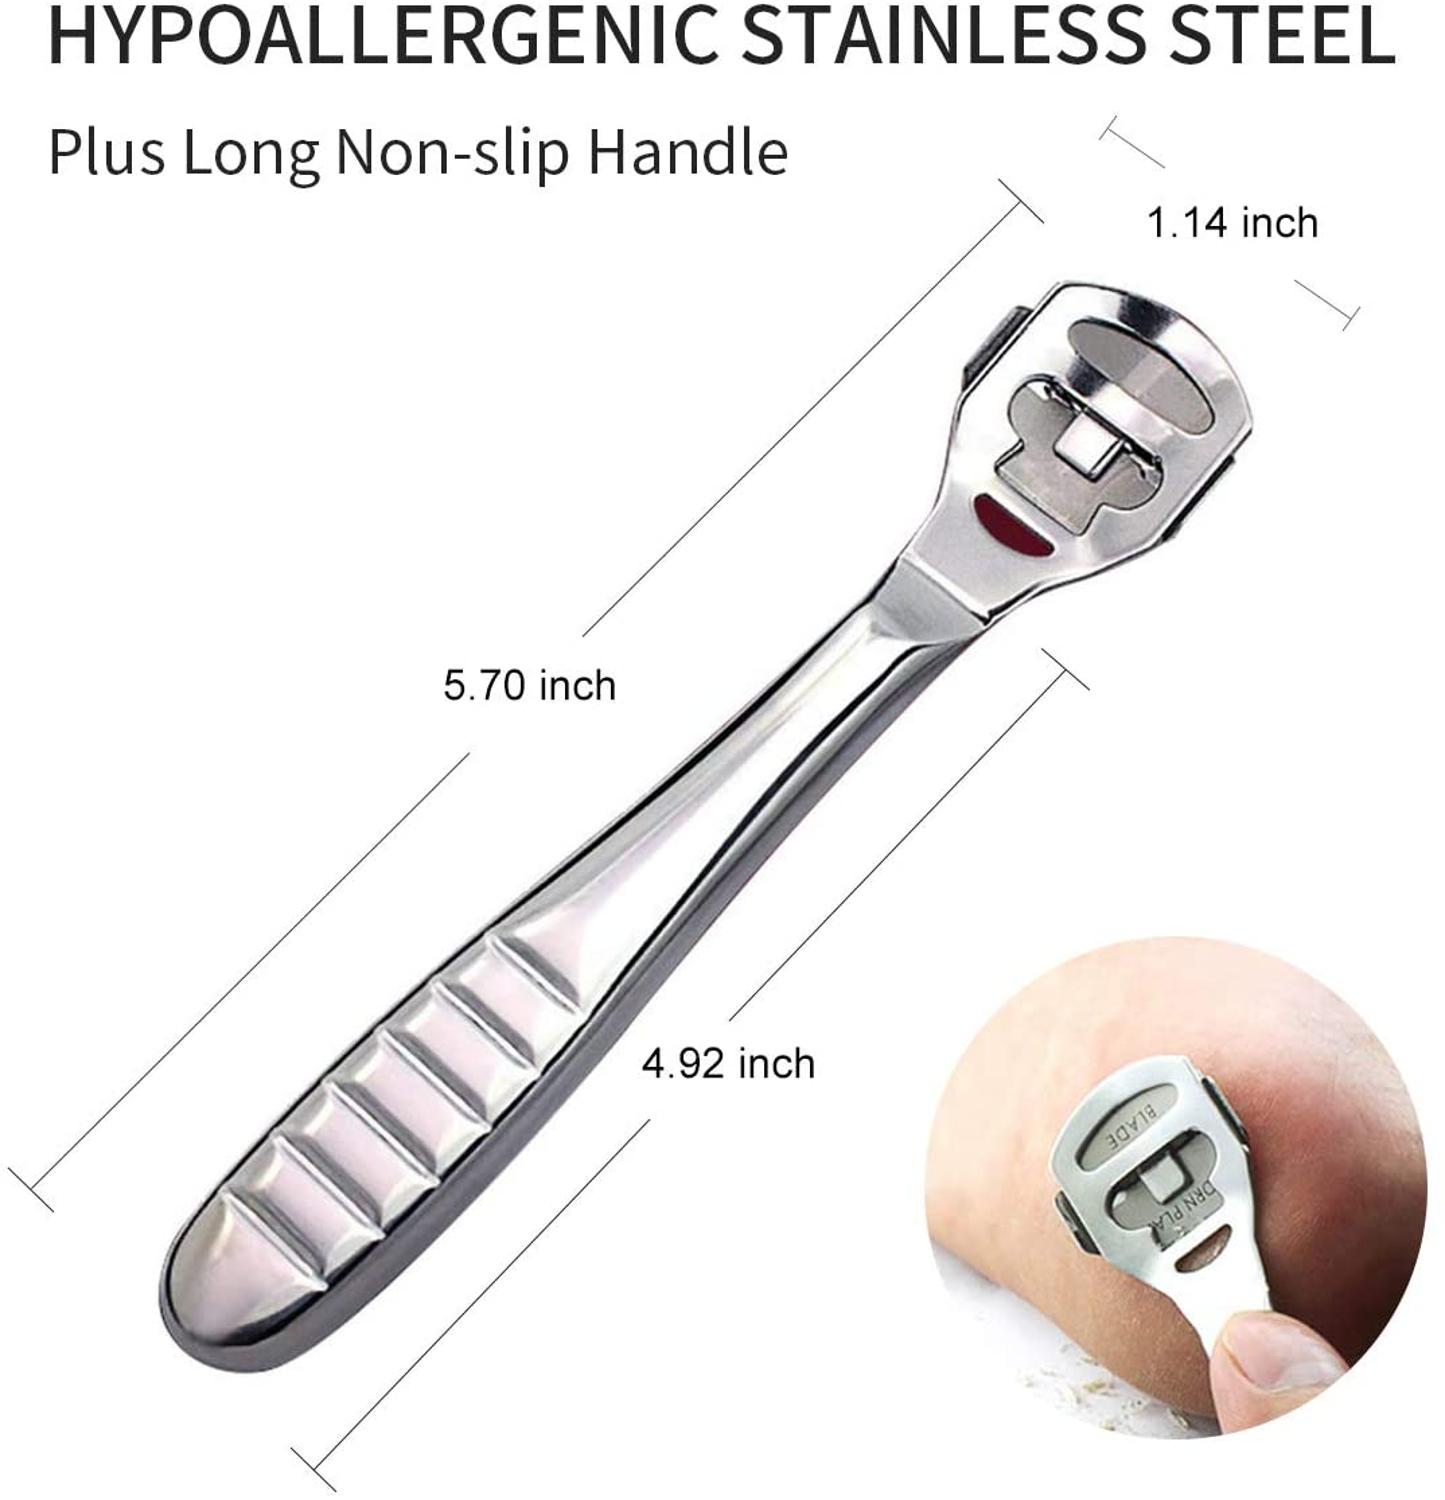 Foot Callus Shaver Heel Hard Skin Remover Hand Feet Pedicure Razor Tool Shavers Stainless Steel Handle 10 Blades Foot Care Tool